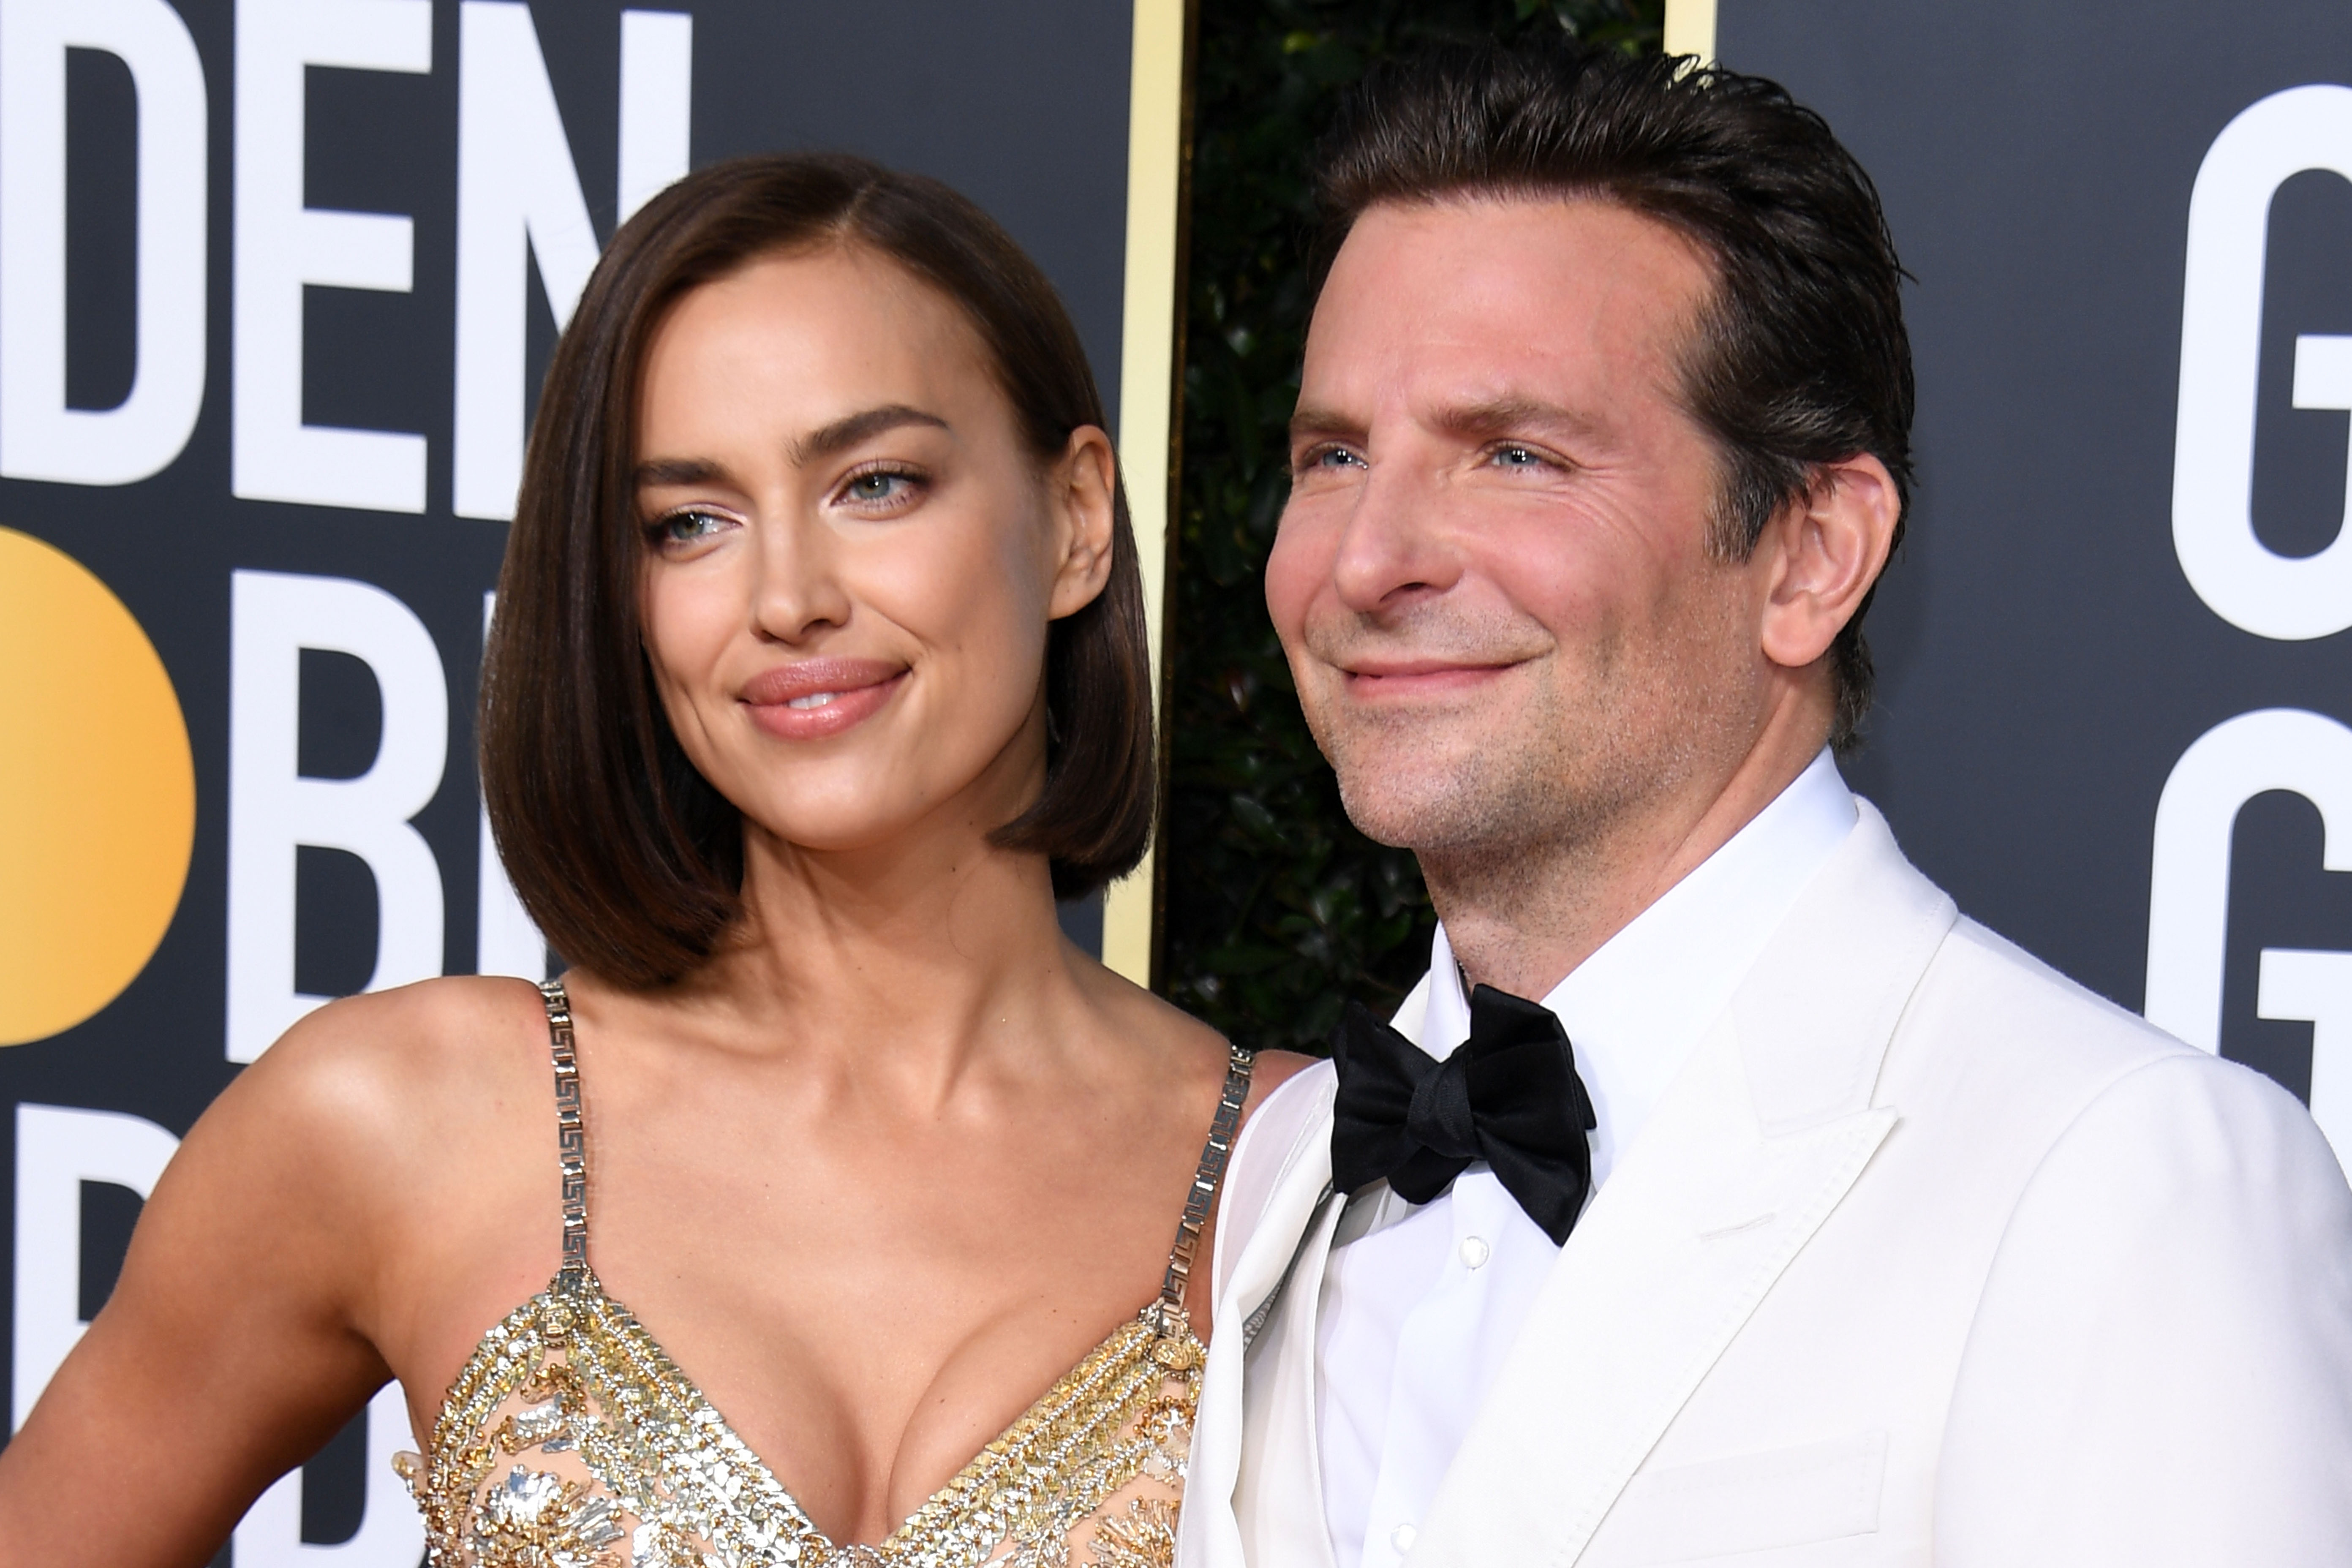 Irina Shayk and Bradley Cooper on January 06, 2019 in Beverly Hills, California | Source: Getty Images